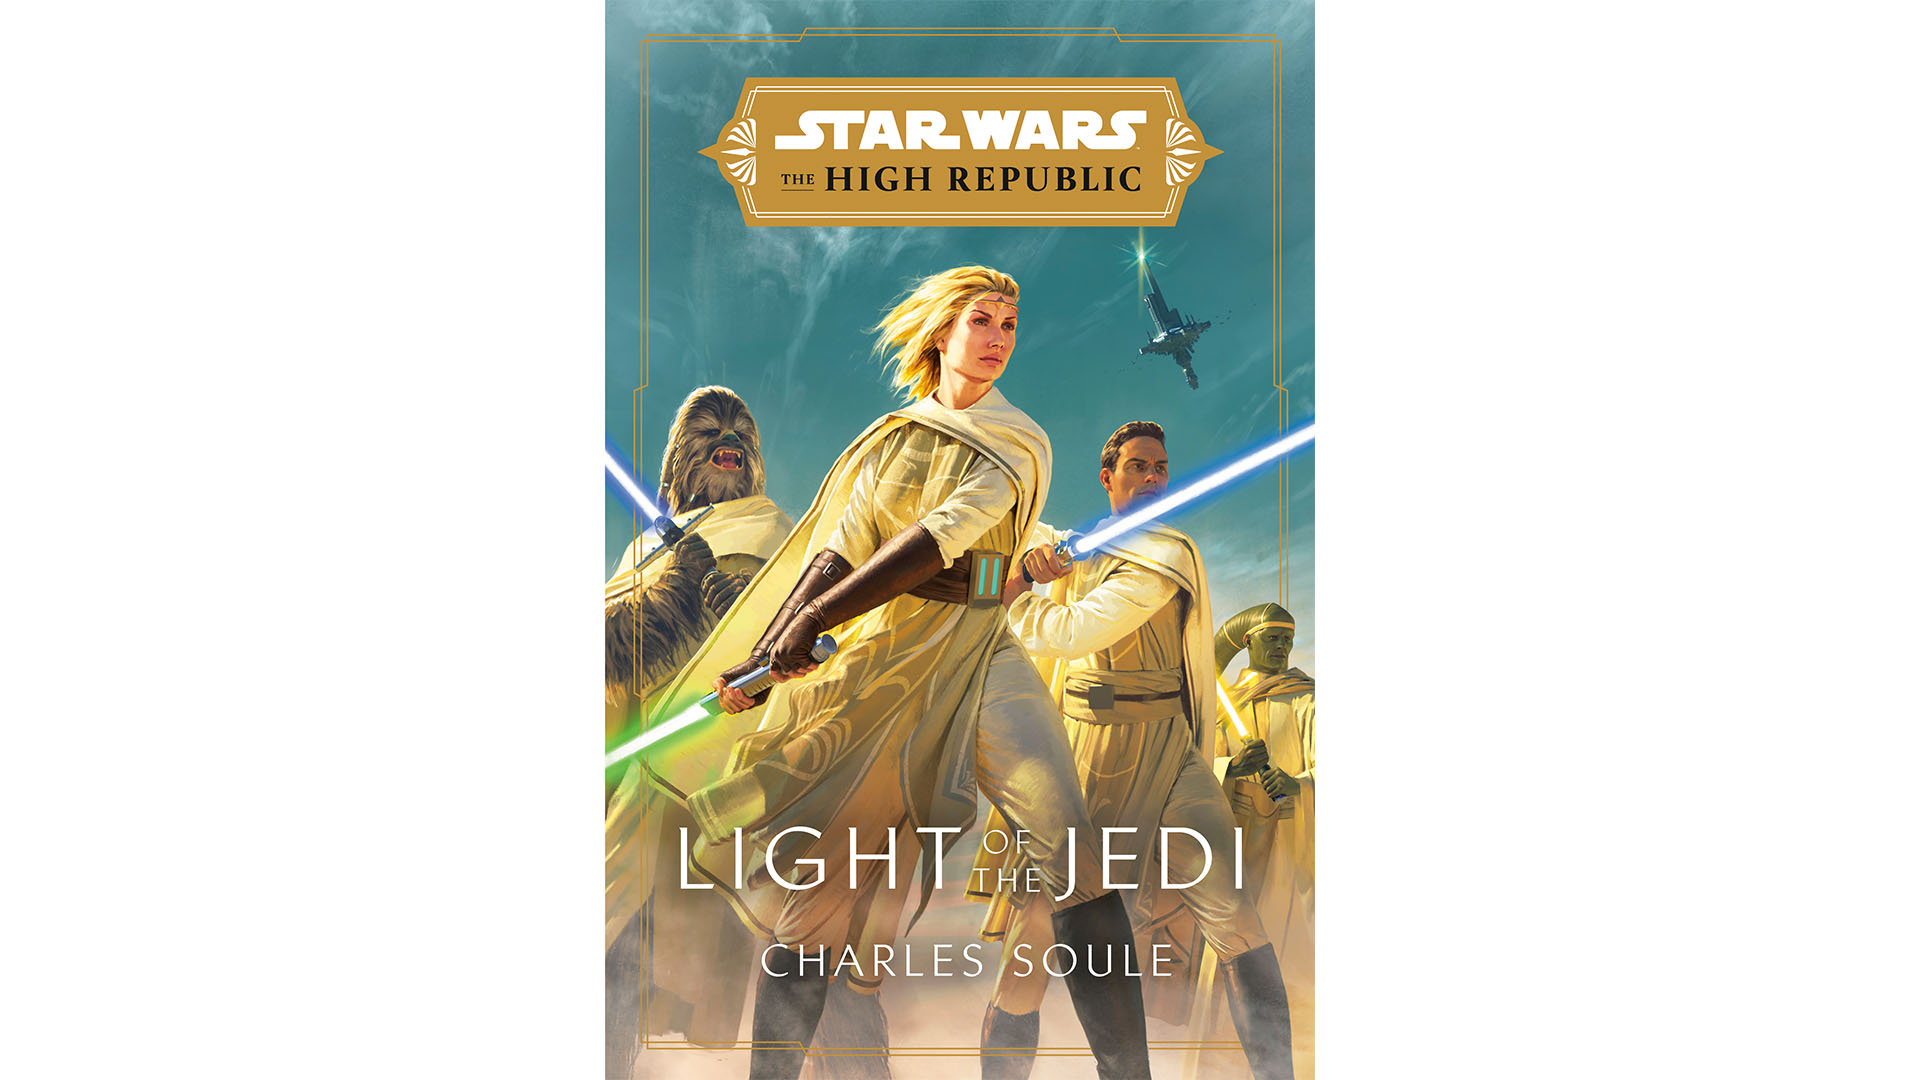 The cover of Star Wars: The High Republic: The Light of the Jedi written by Charles Soule